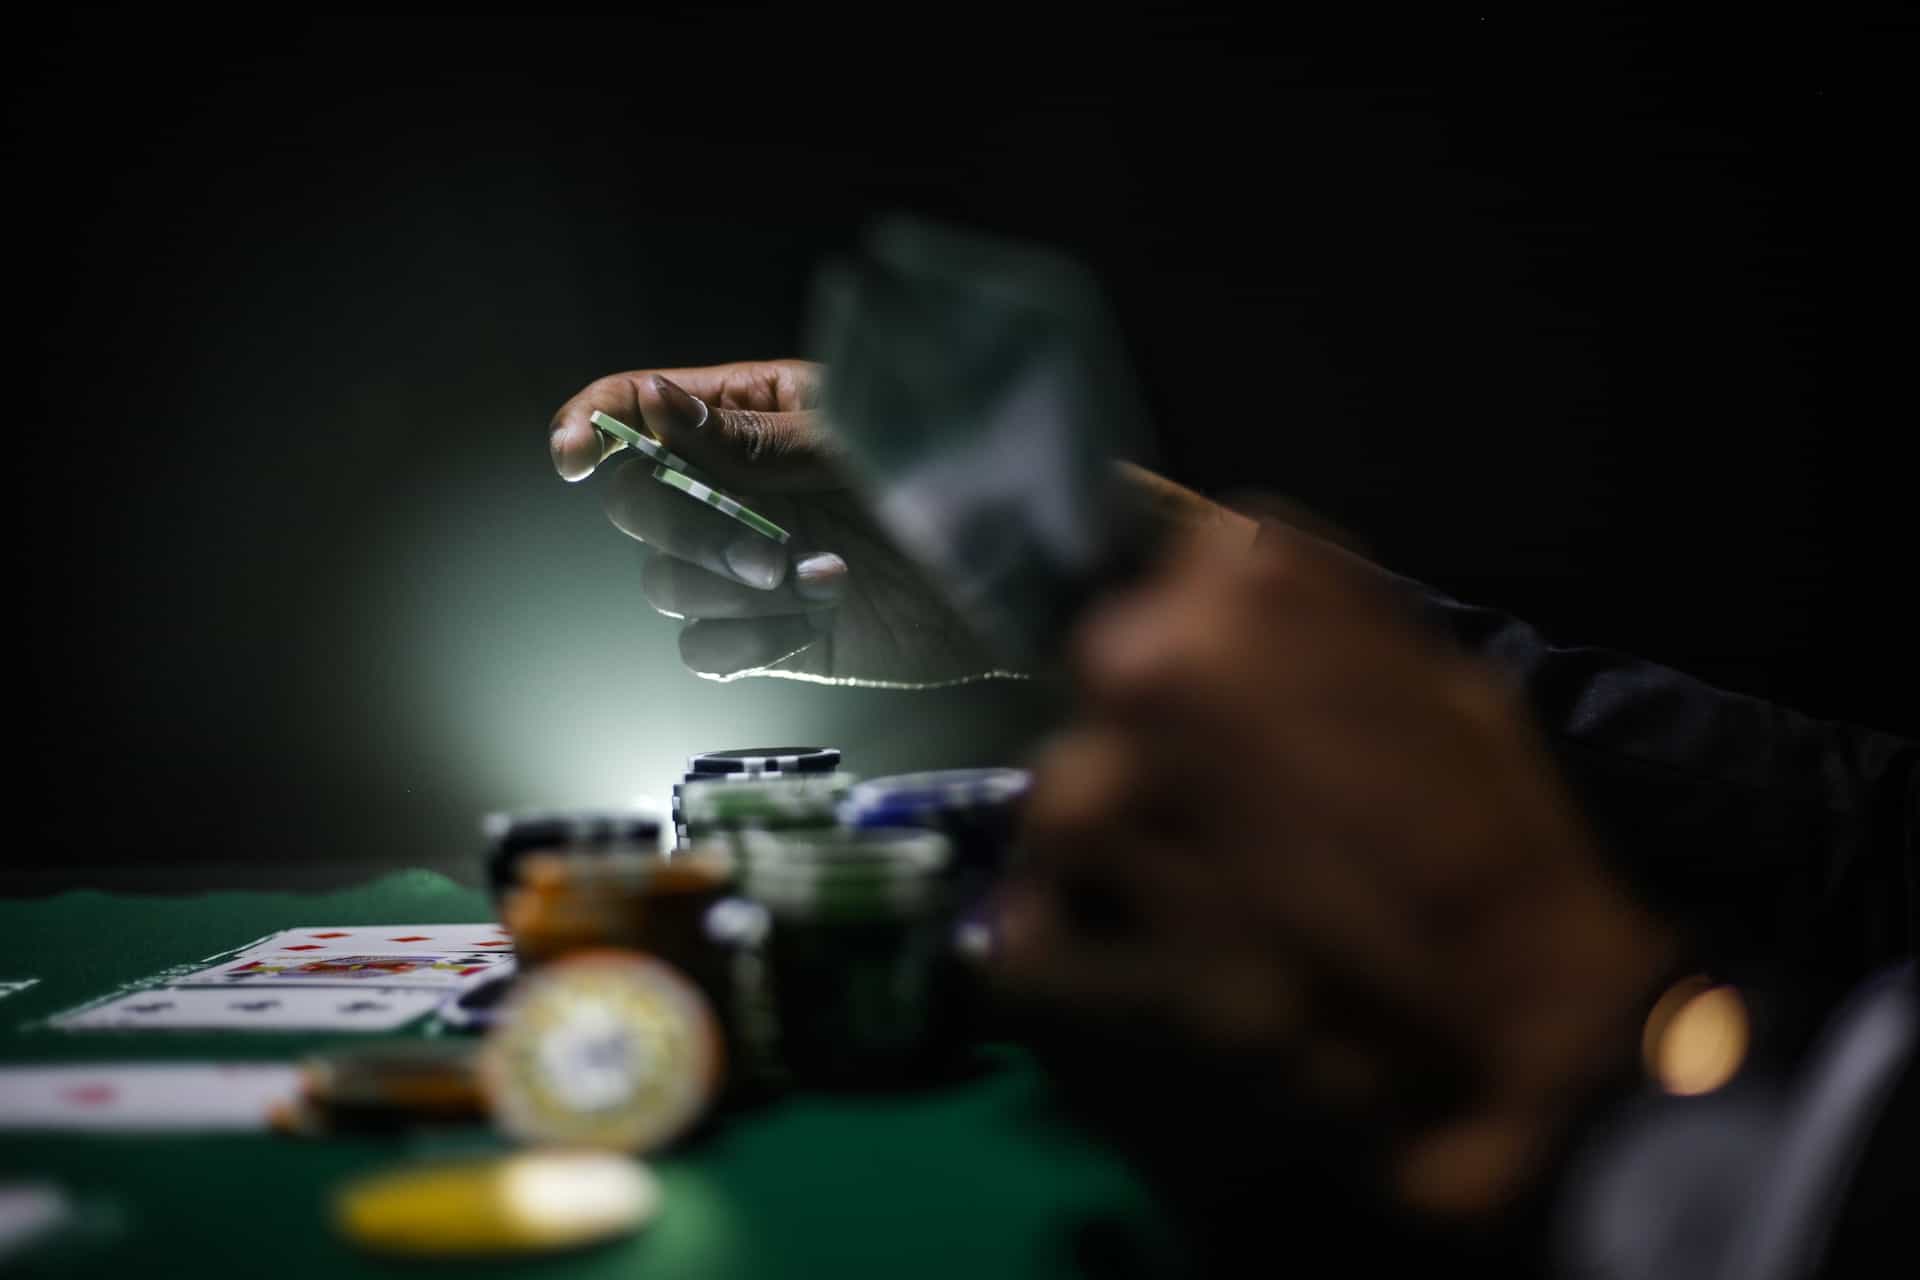 A side view of people’s hands playing poker at a table, with one person playing a card while surrounded by stacks of gambling chips.